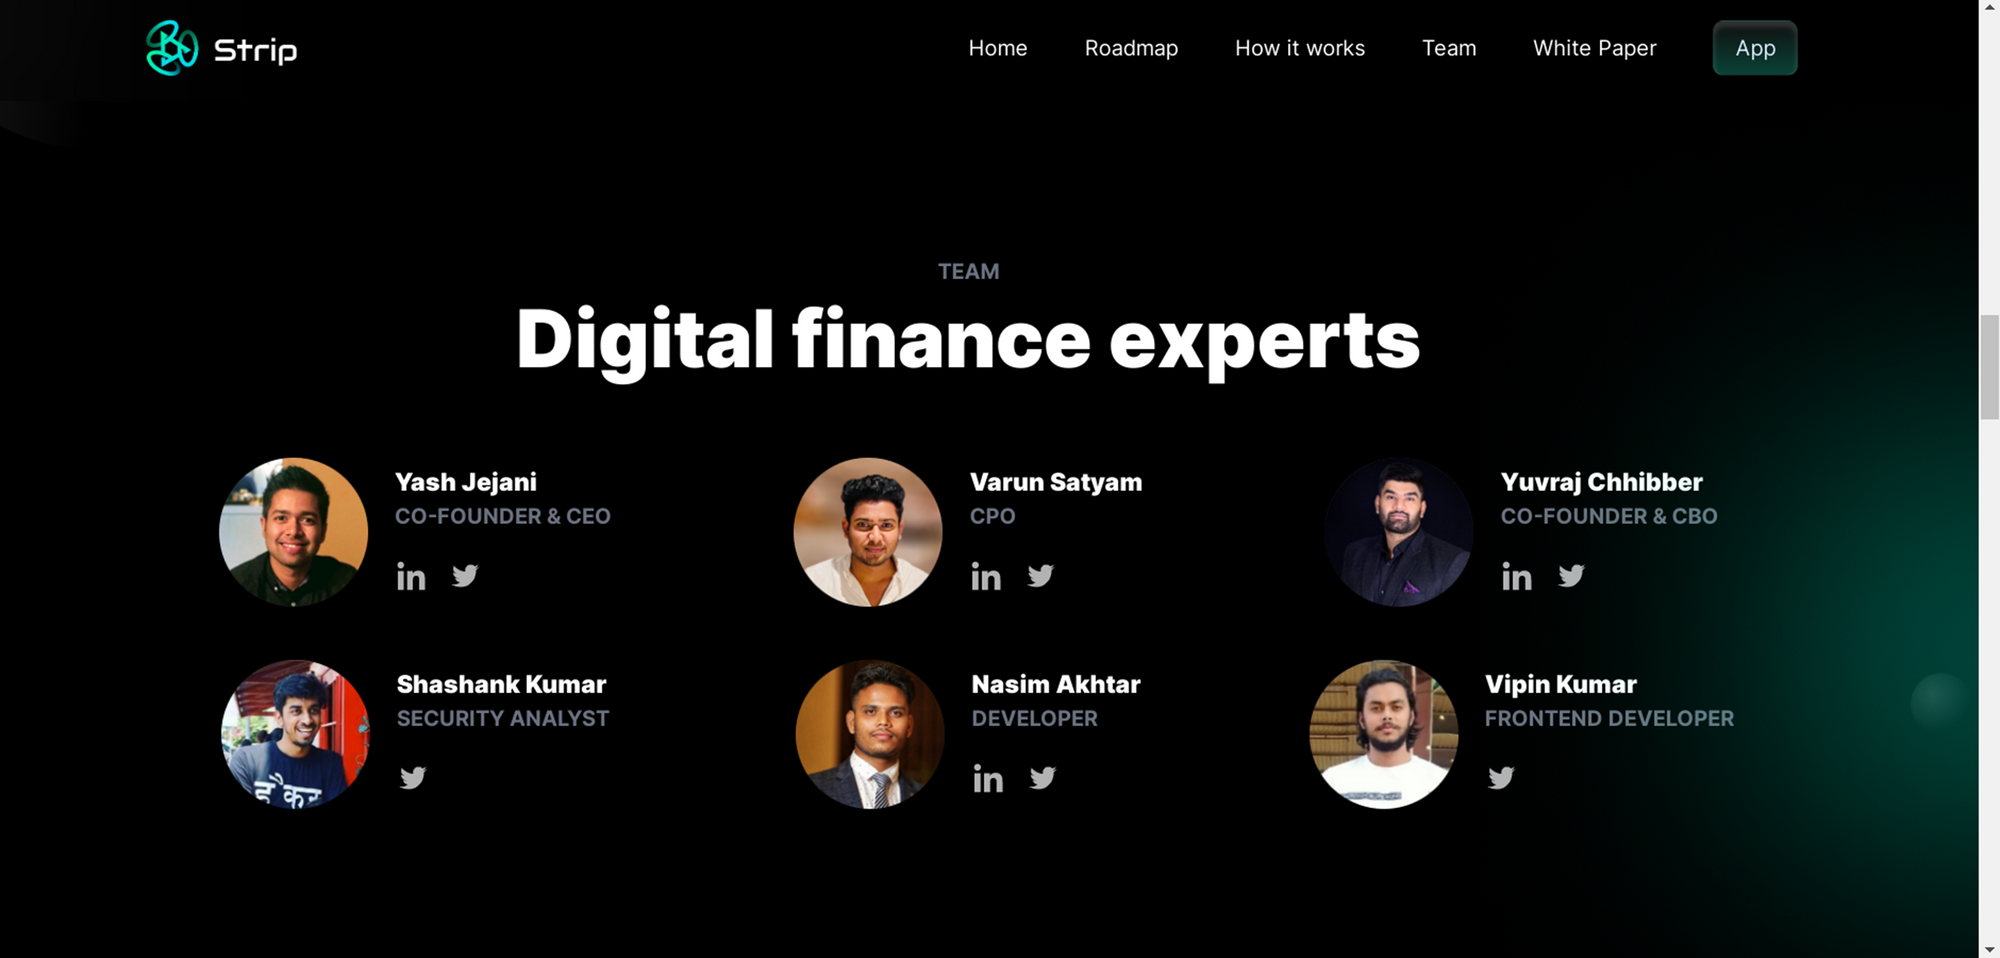 Strip Finance, one of the top startup companies in hyderabad